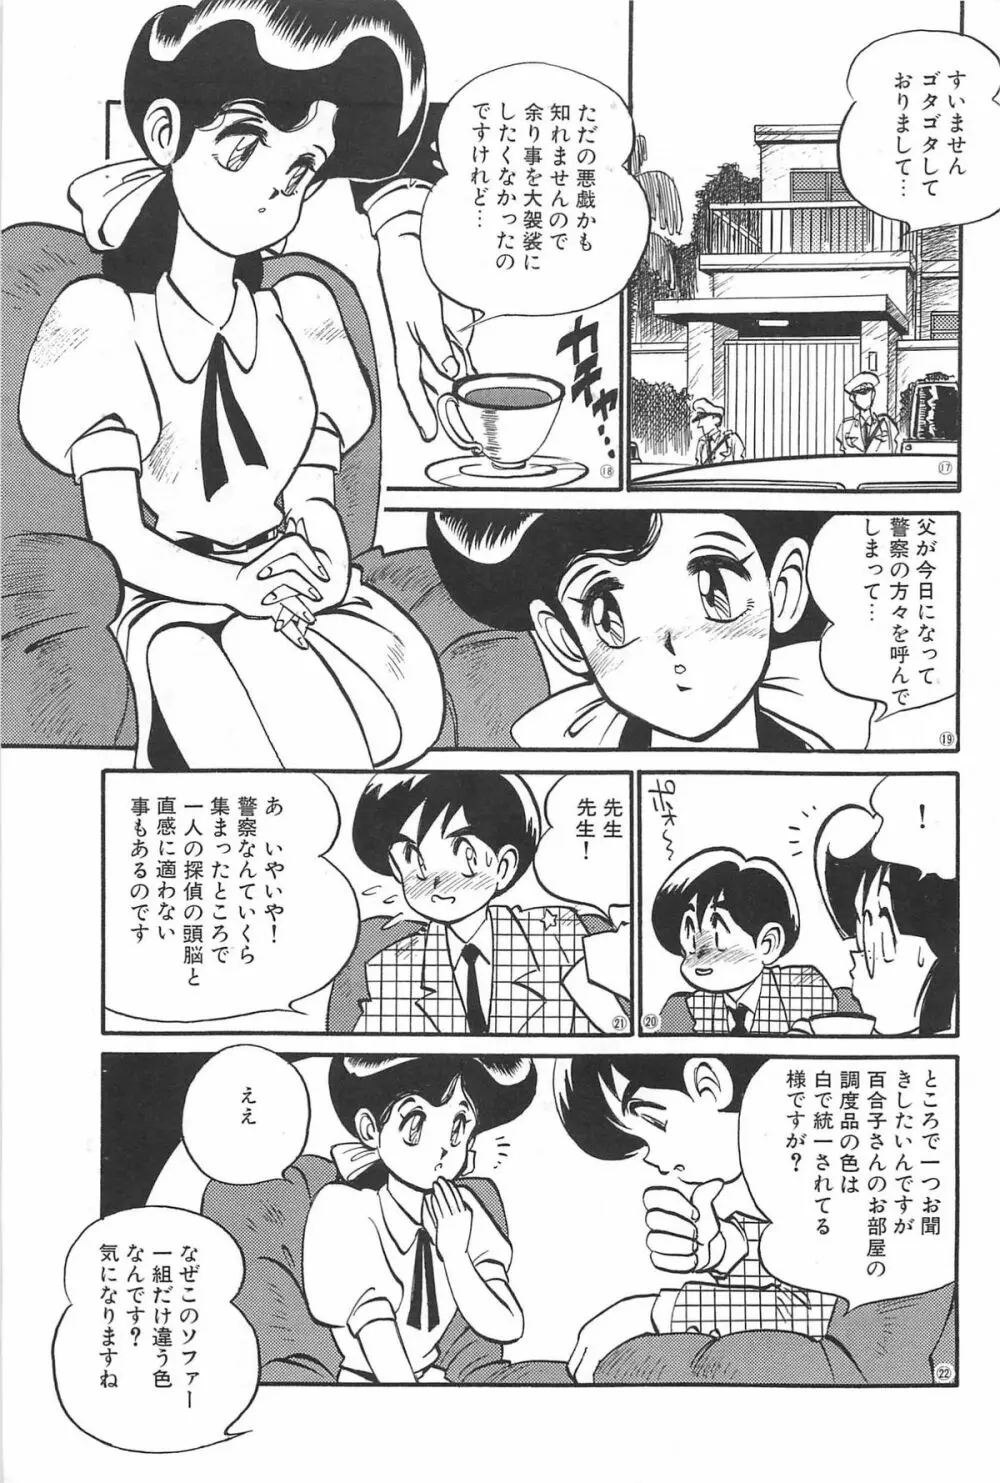 LOVE ME 1995 Page.137